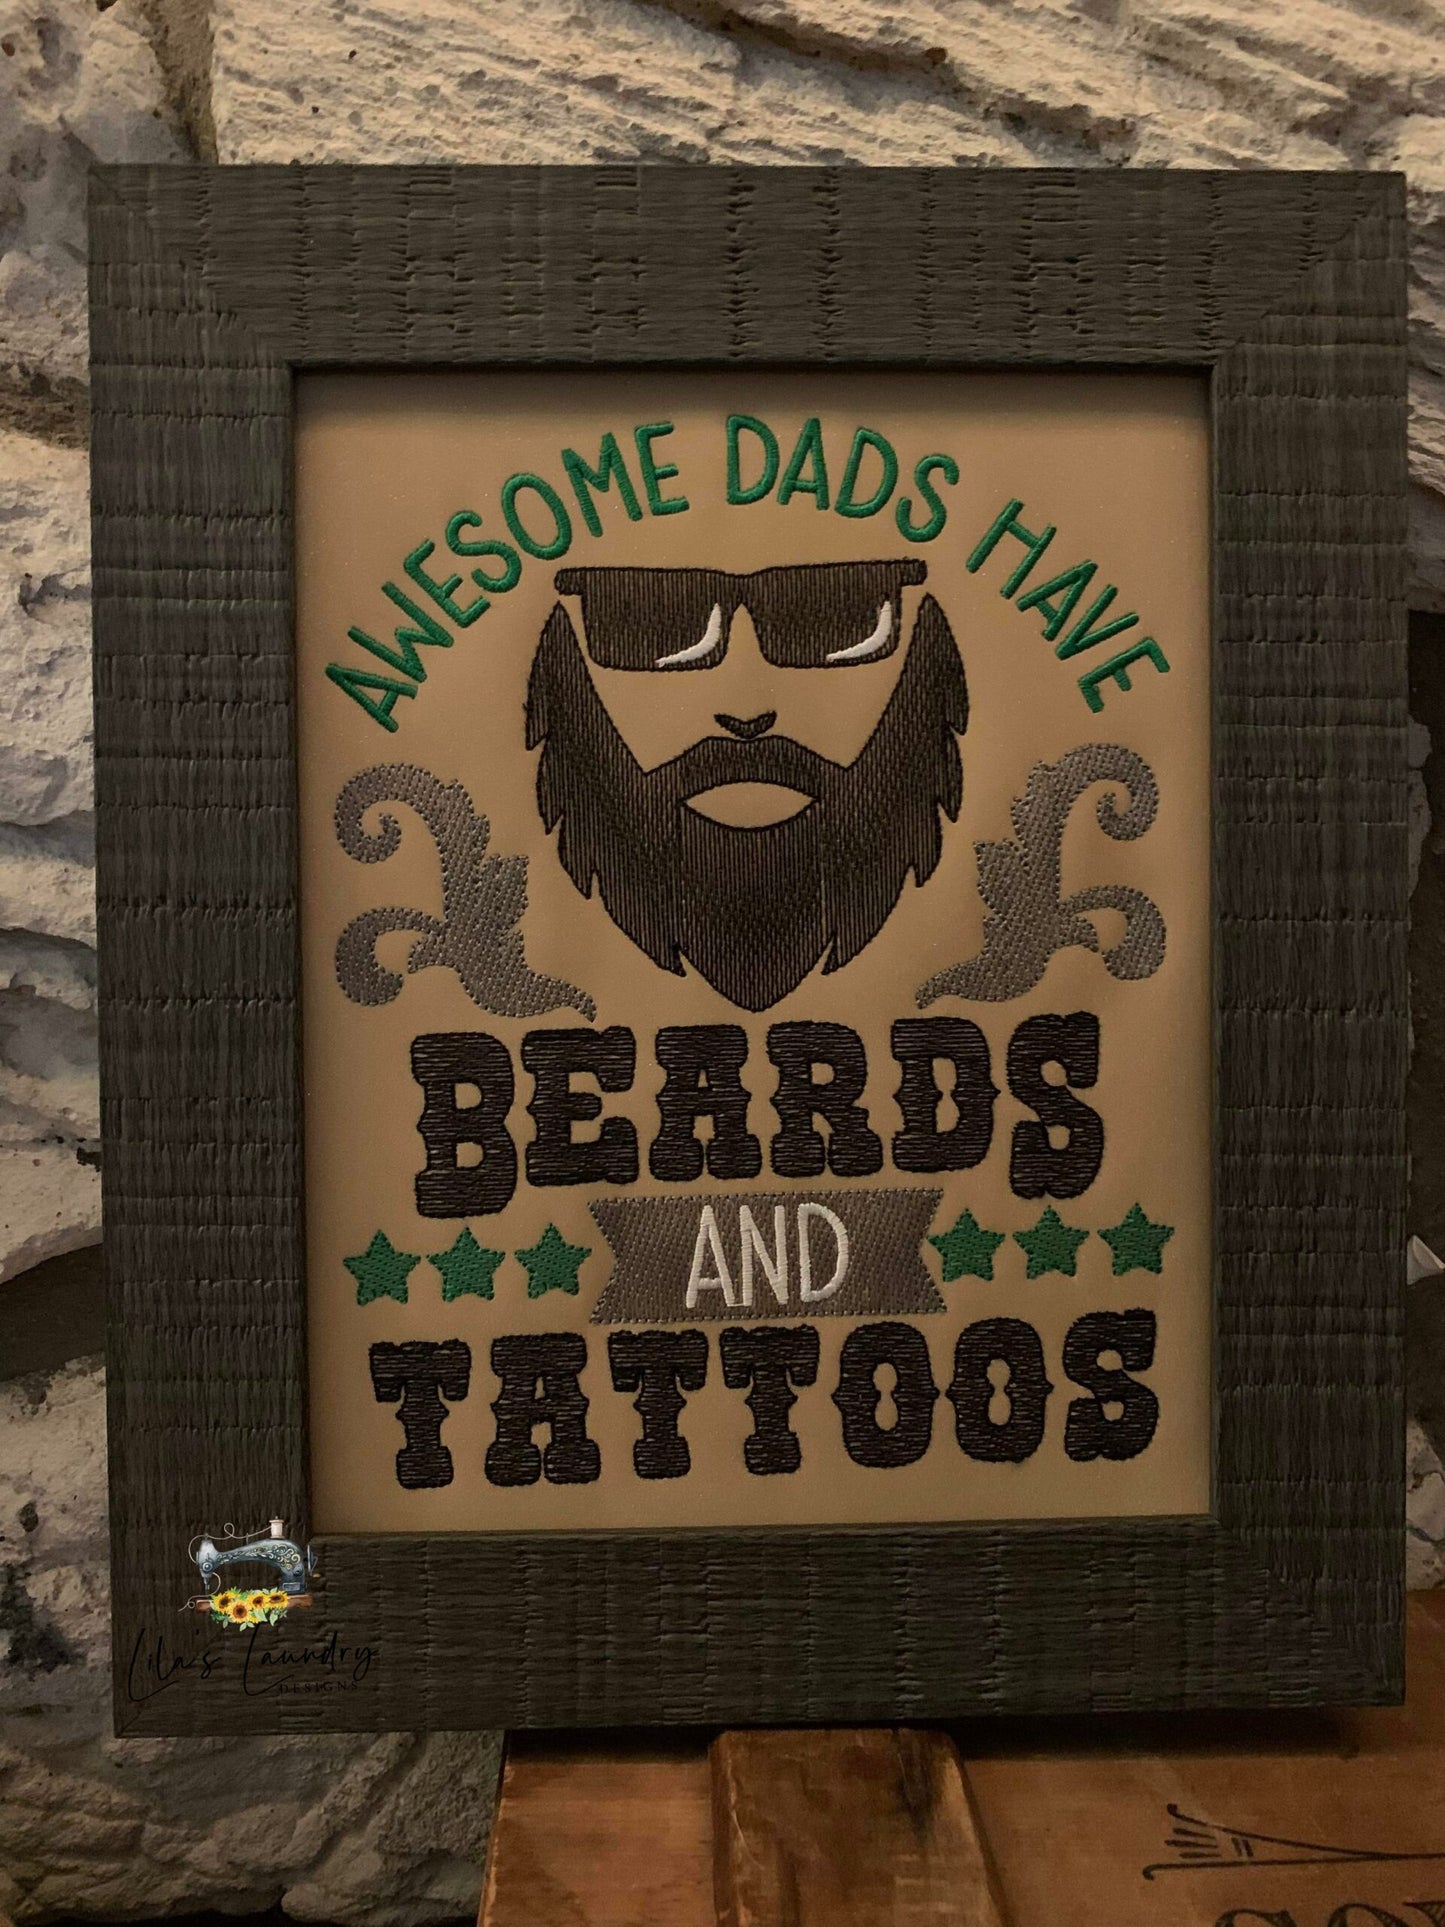 Beards and Tattoos - 3 sizes- Digital Embroidery Design